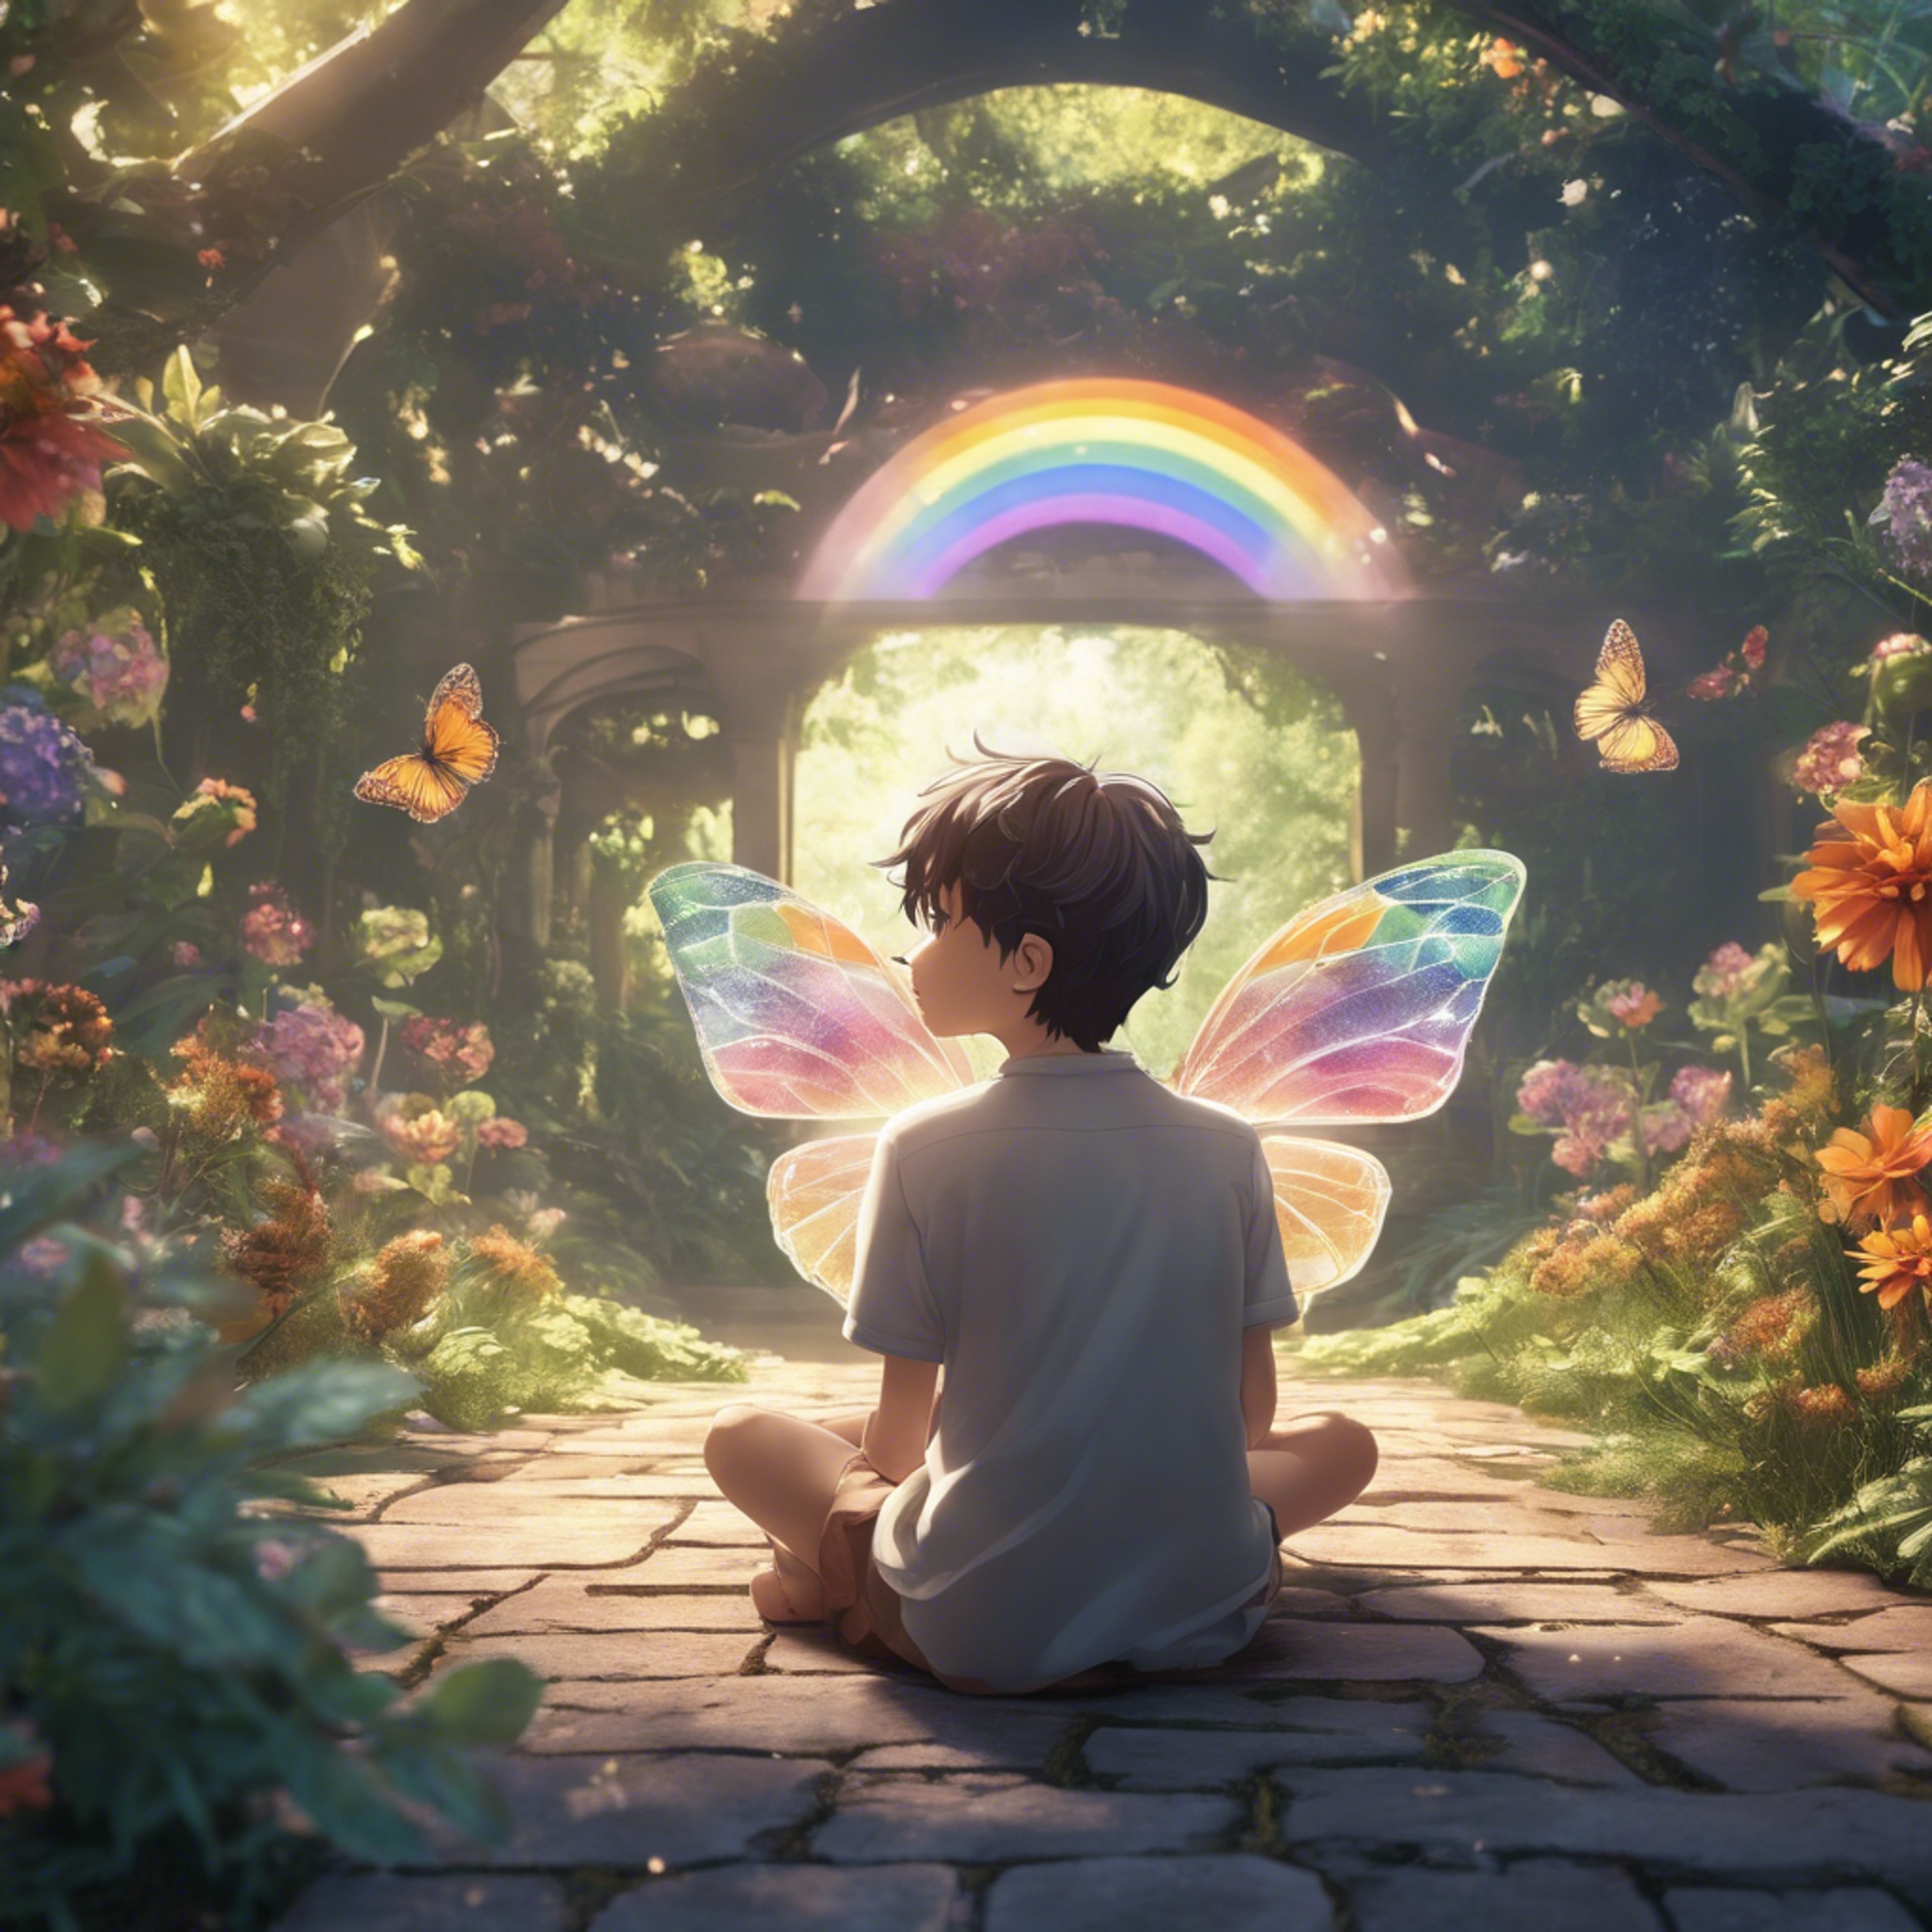 An innocent anime boy with rainbow wings gazing at a butterfly in a hidden garden. 墙纸[04bec09c0c034ff9b0e5]